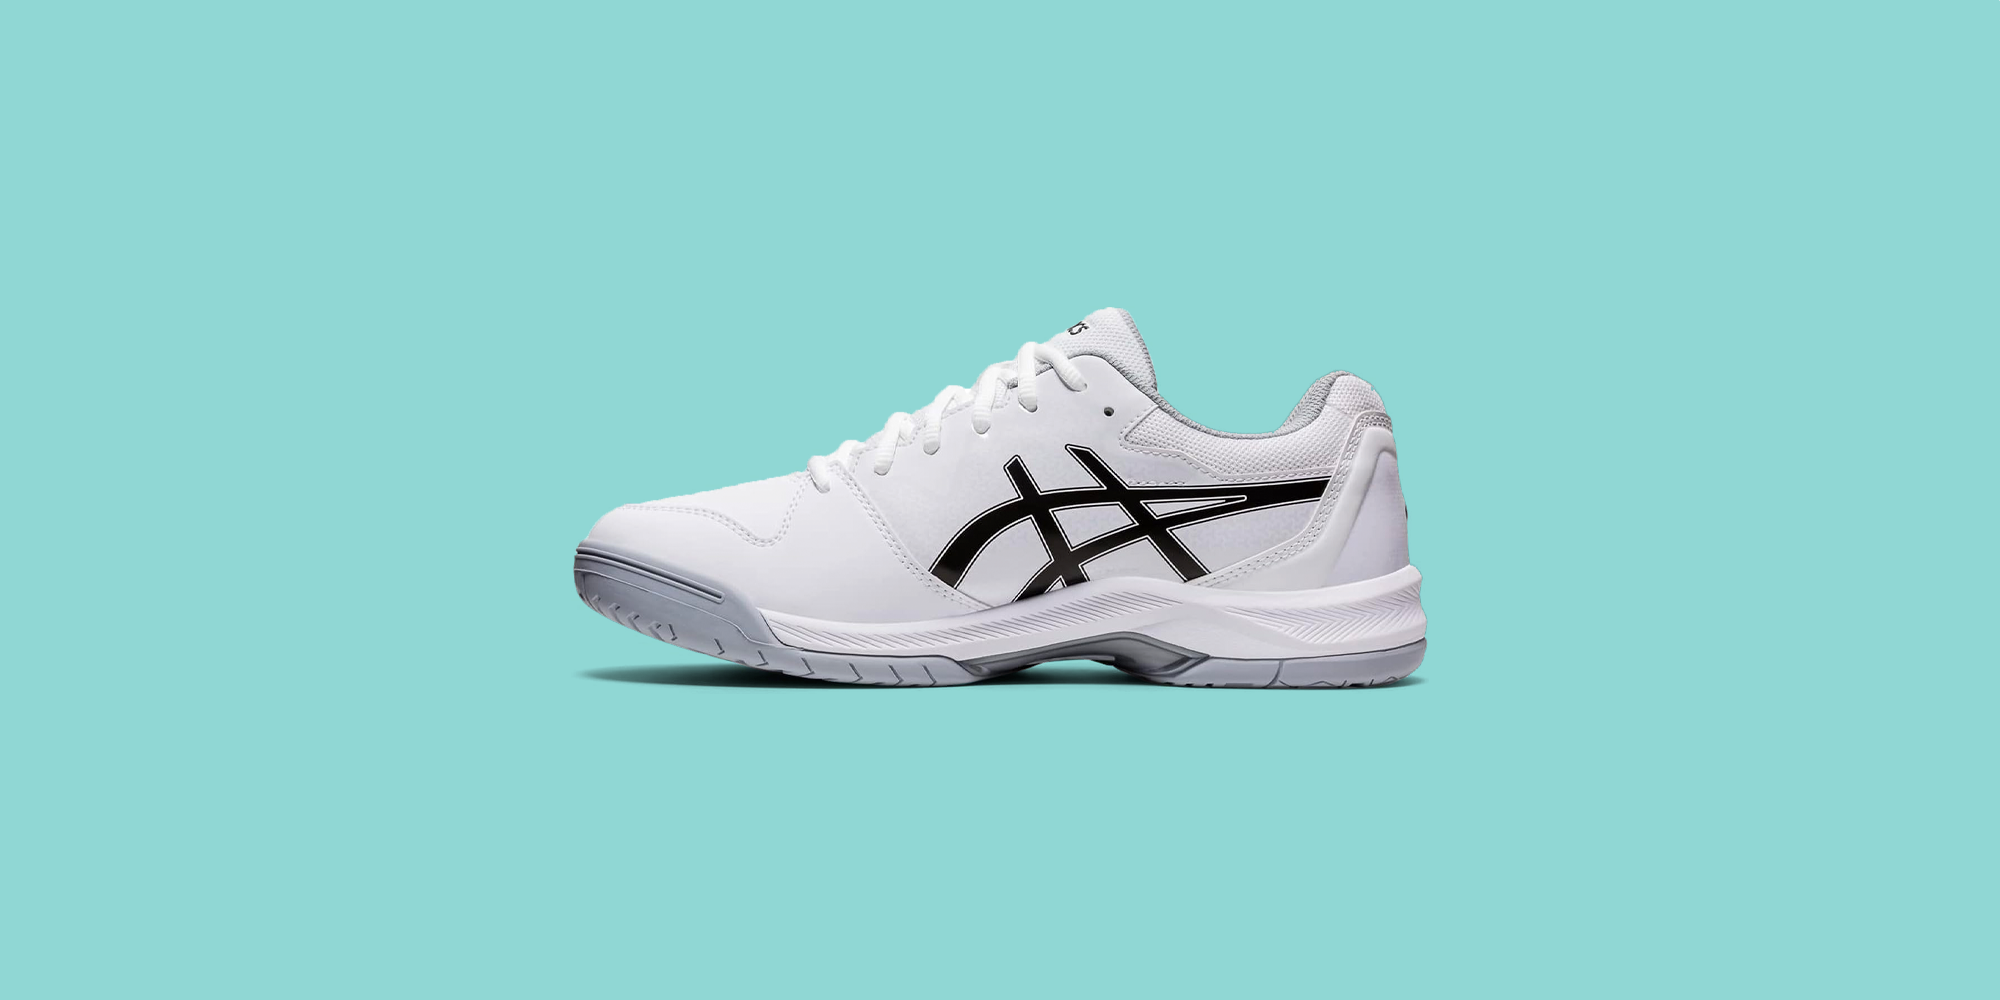 9 Best Tennis Shoes for Men of 2023